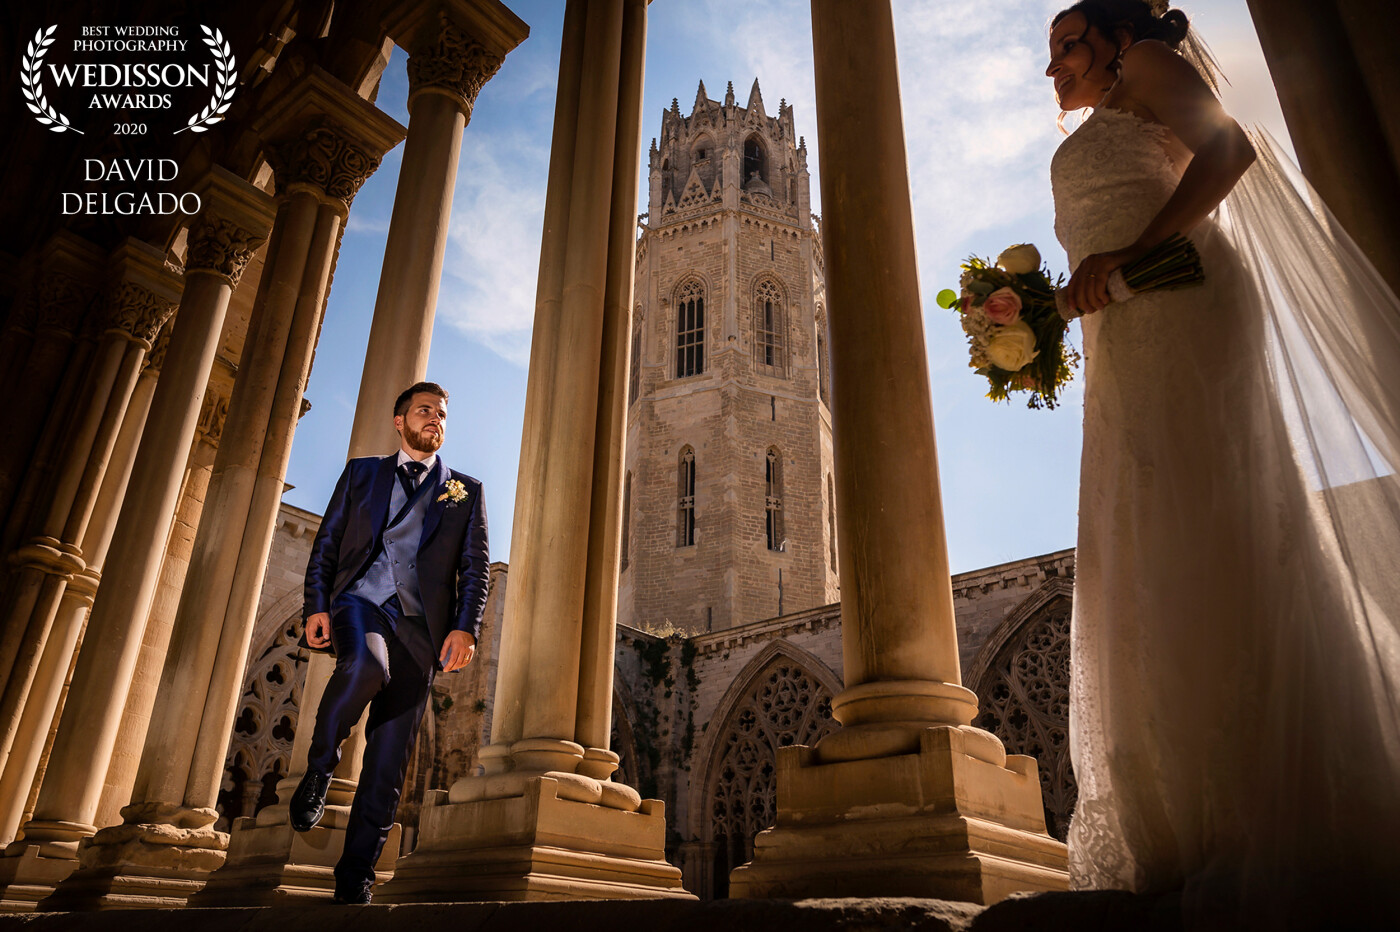 La Seu Vella - They are Patricia and Albert, La Seu Vella is the Lleida's castle, the emblem of the city, it was a beautiful place to do the photo session on their wedding day.